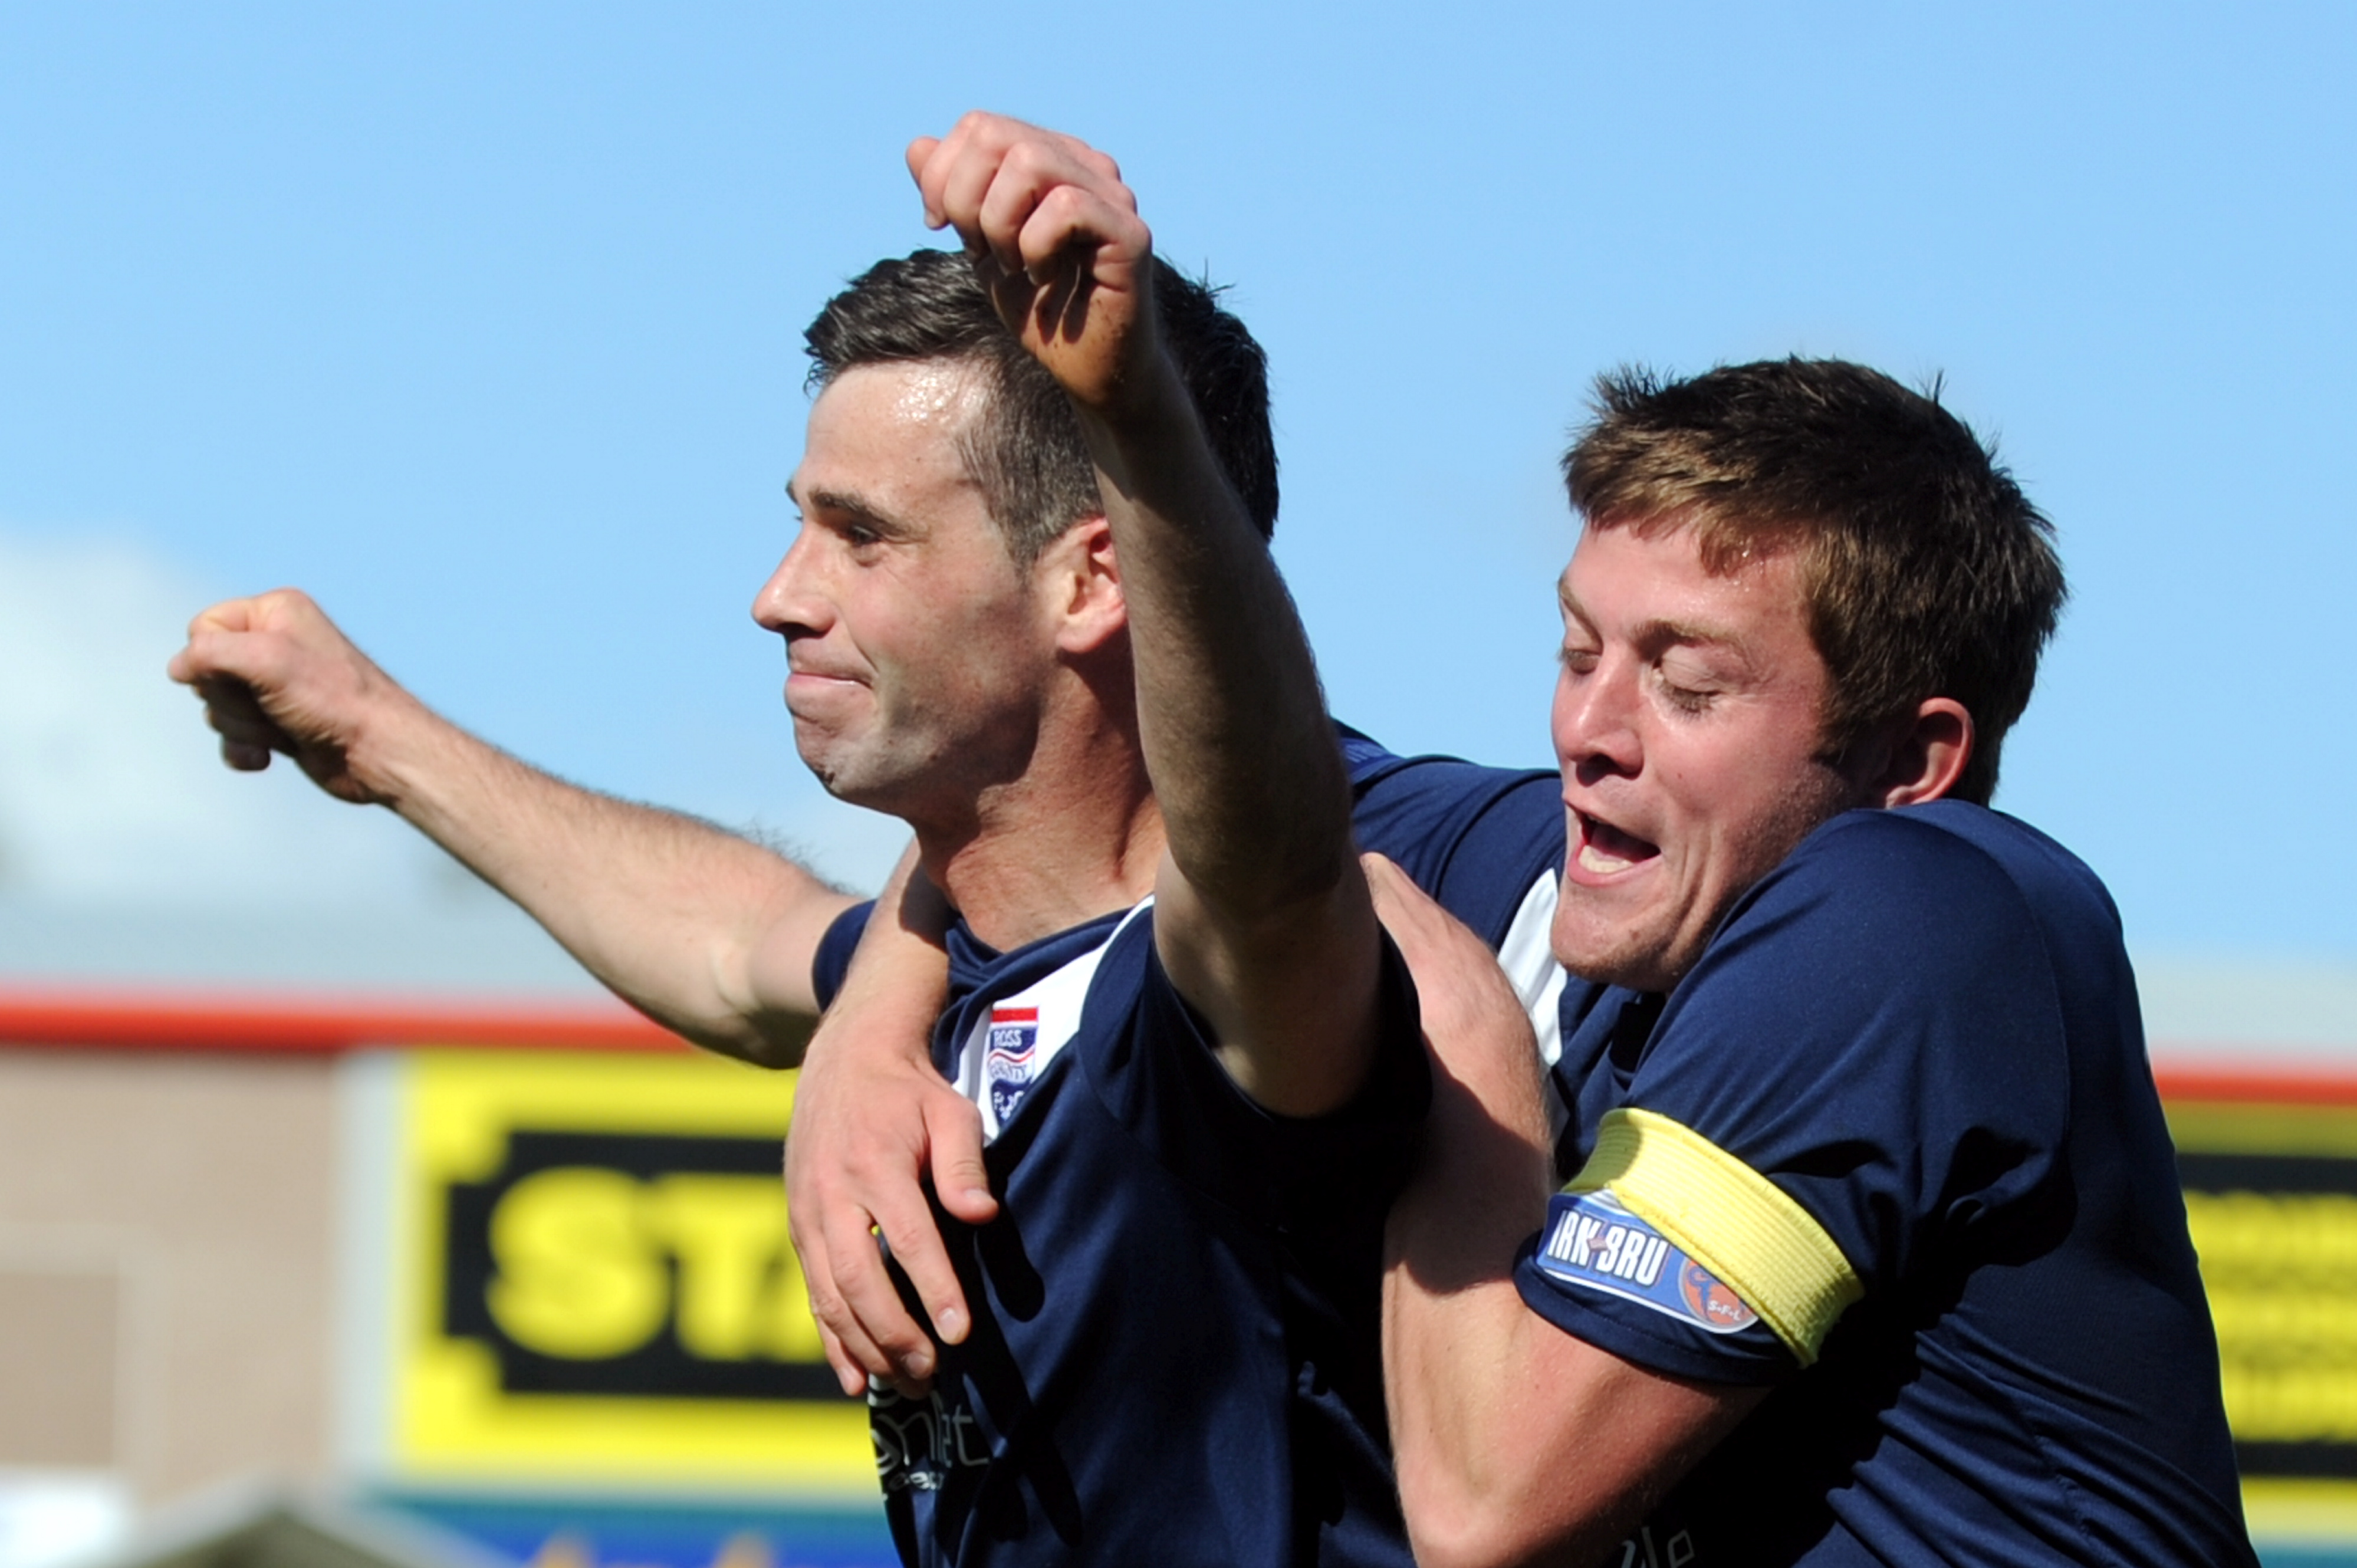 Stuart Kettlewell and Richard Brittain, both now on the coaching staff at Ross County, celebrate against Hamilton Accies in 2012.